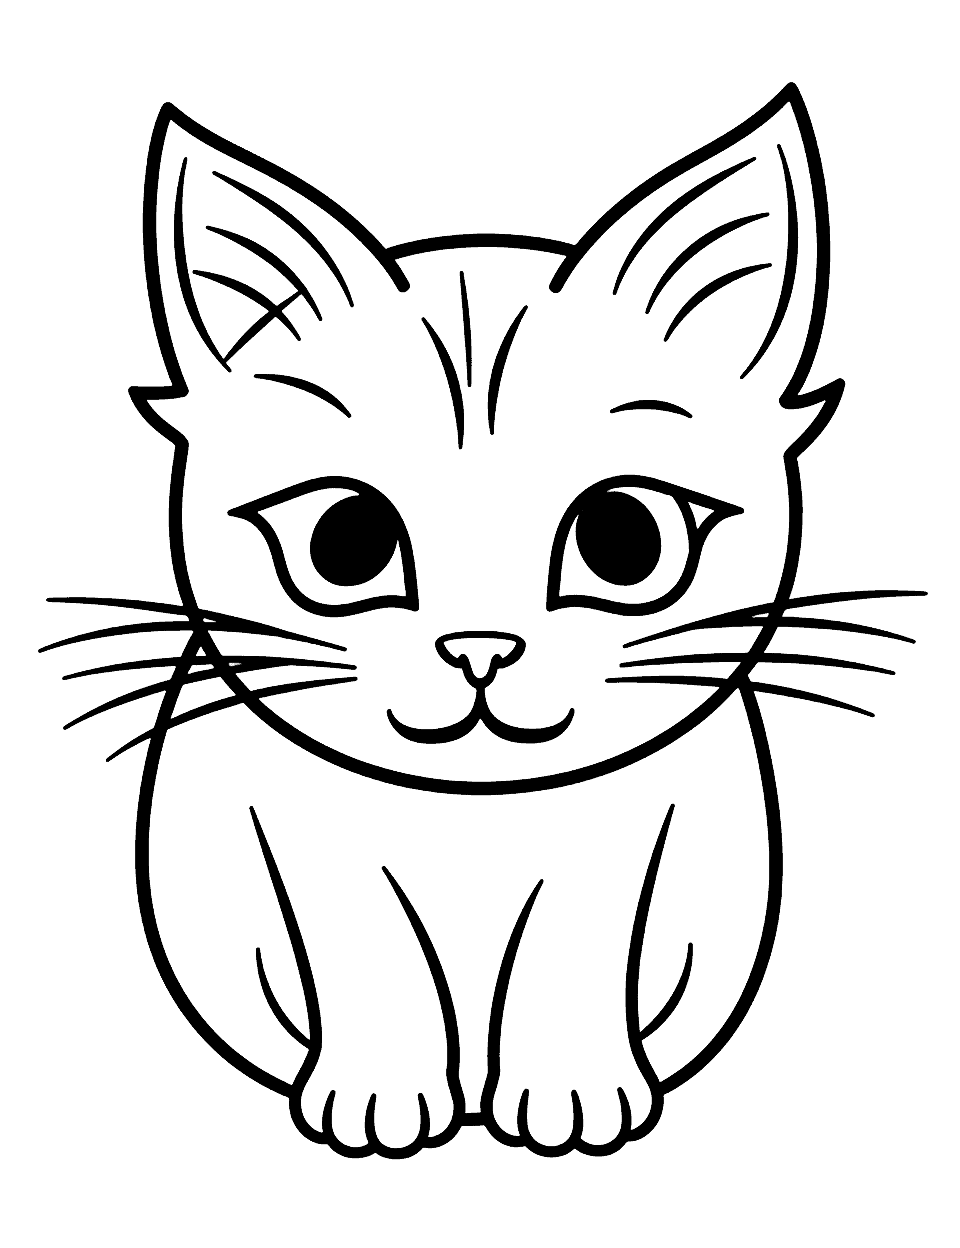 Easy Coloring Page of a Cat's Face Cat - A simple, easy-to-color image of a cat’s face.